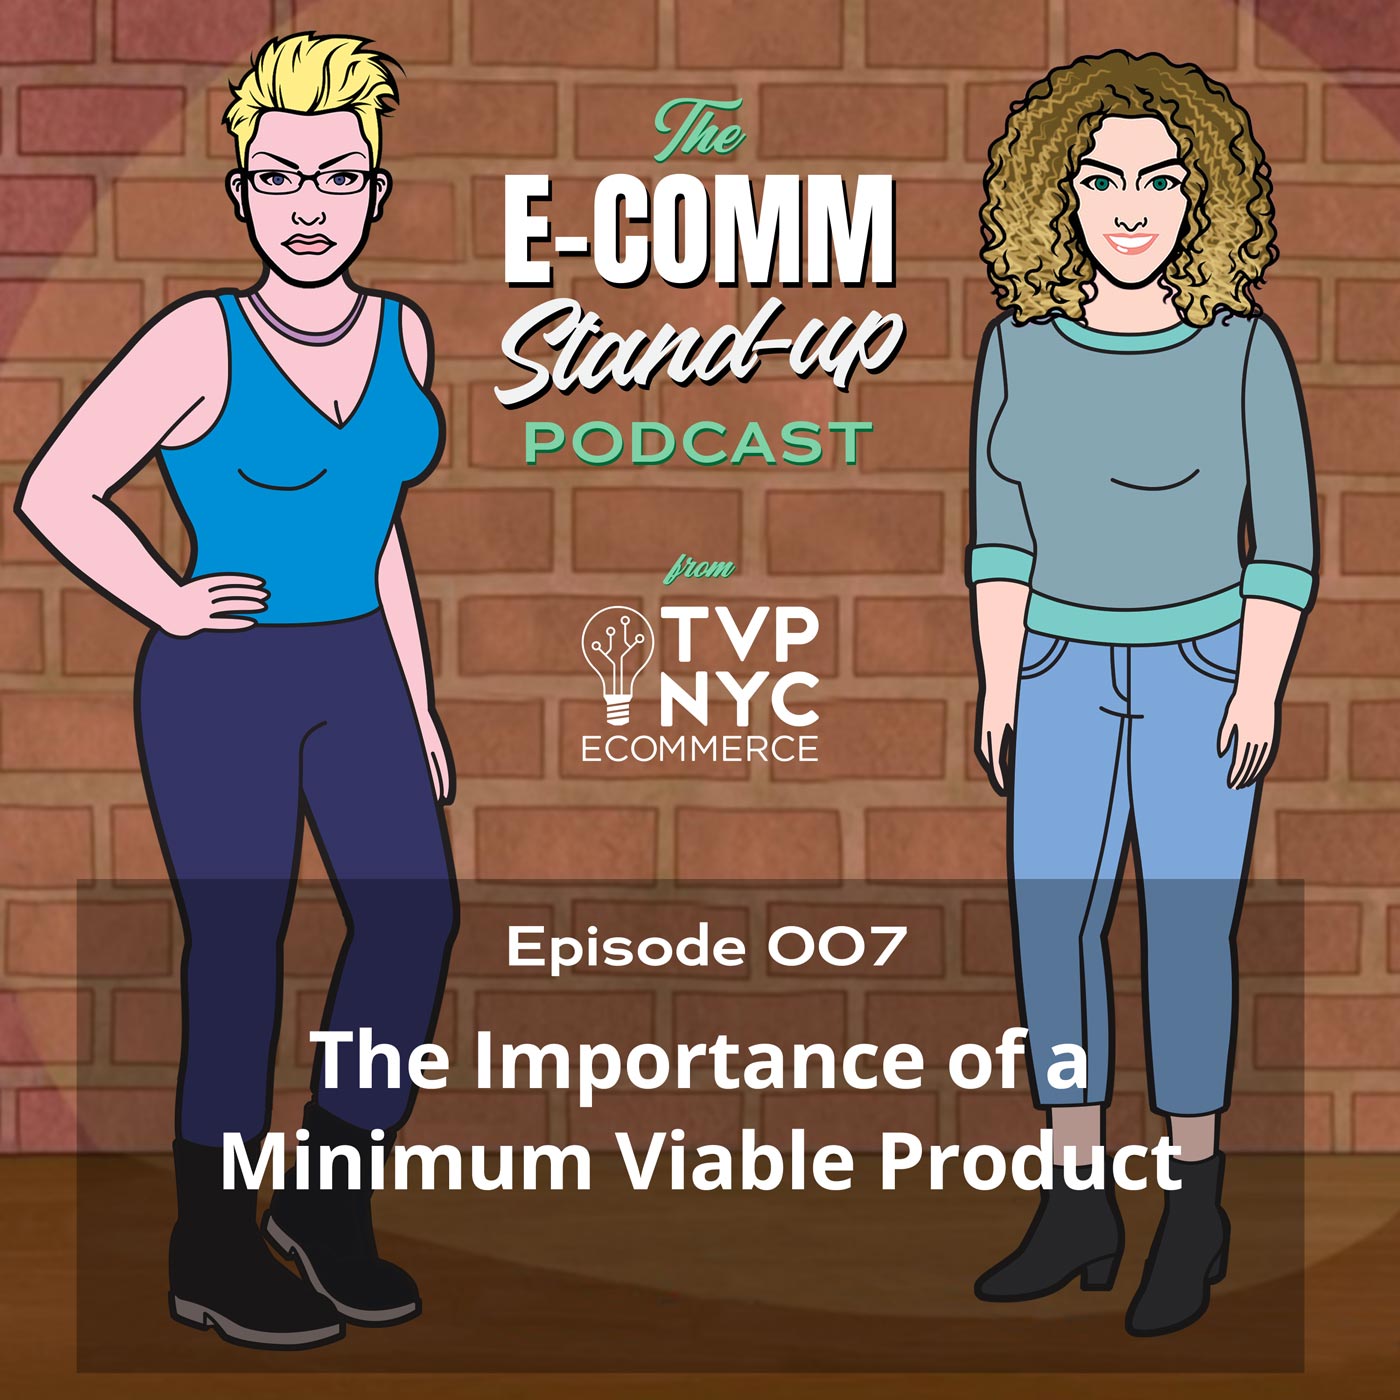 [Podcast] The Importance of a Minimum Viable Product